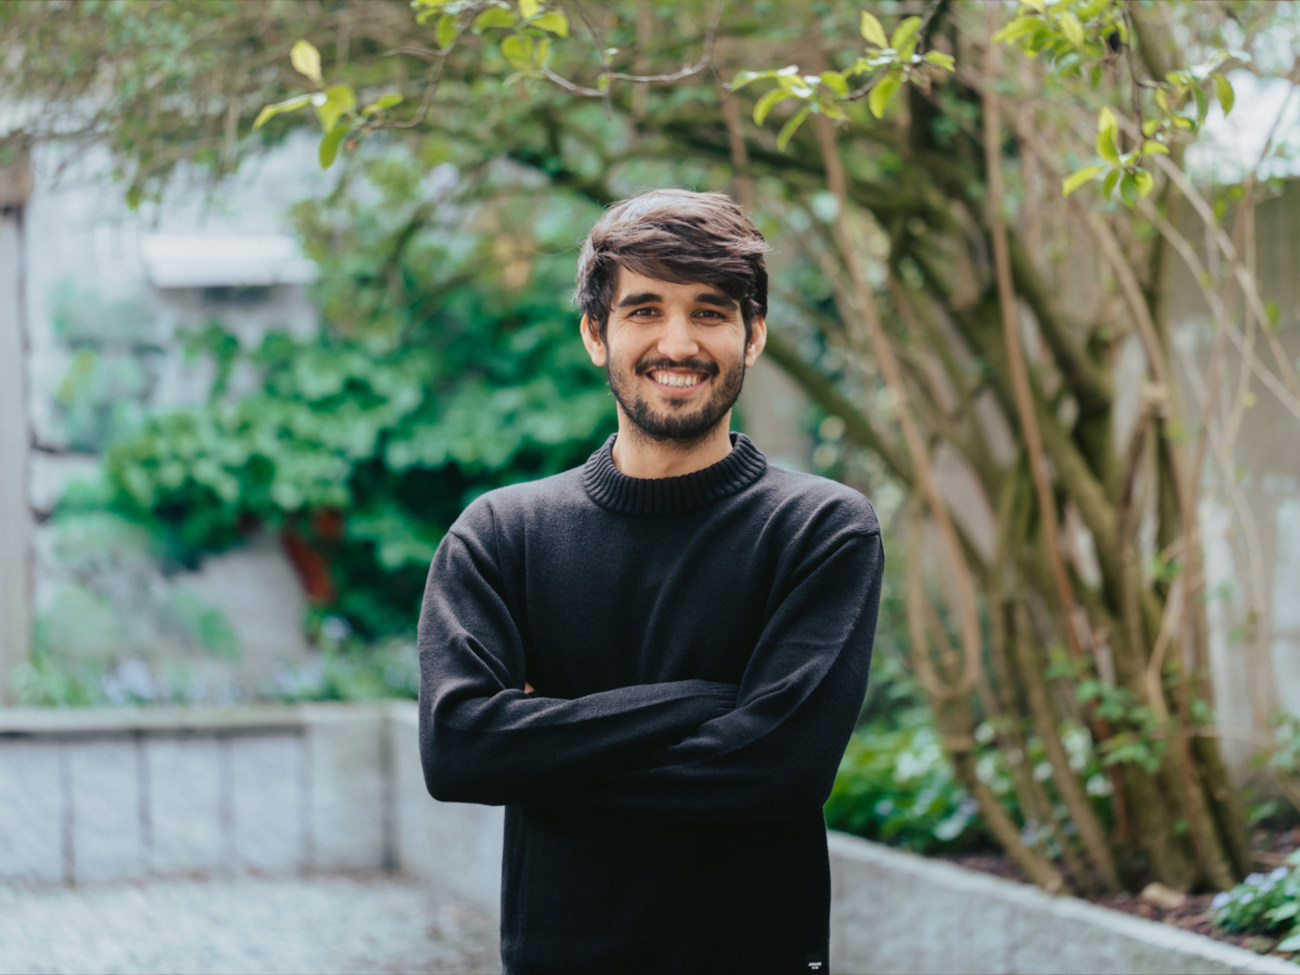 Mohammad Fahim Amini stands outside and smiles at the camera. Plants and a small stone wall can be seen in the background.